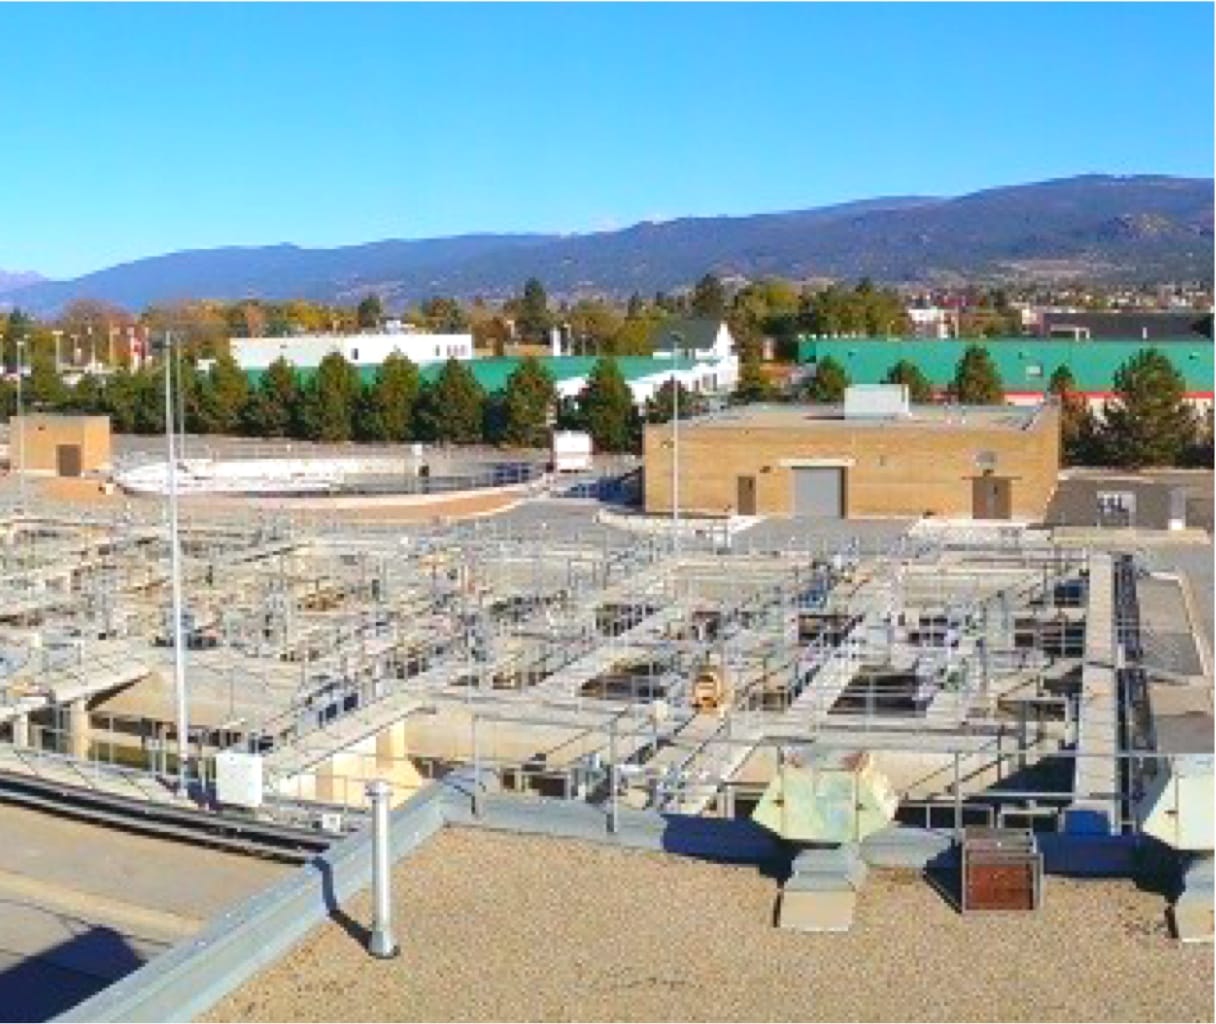 Solution Img Penticton Wastewater Treatment Plant 03